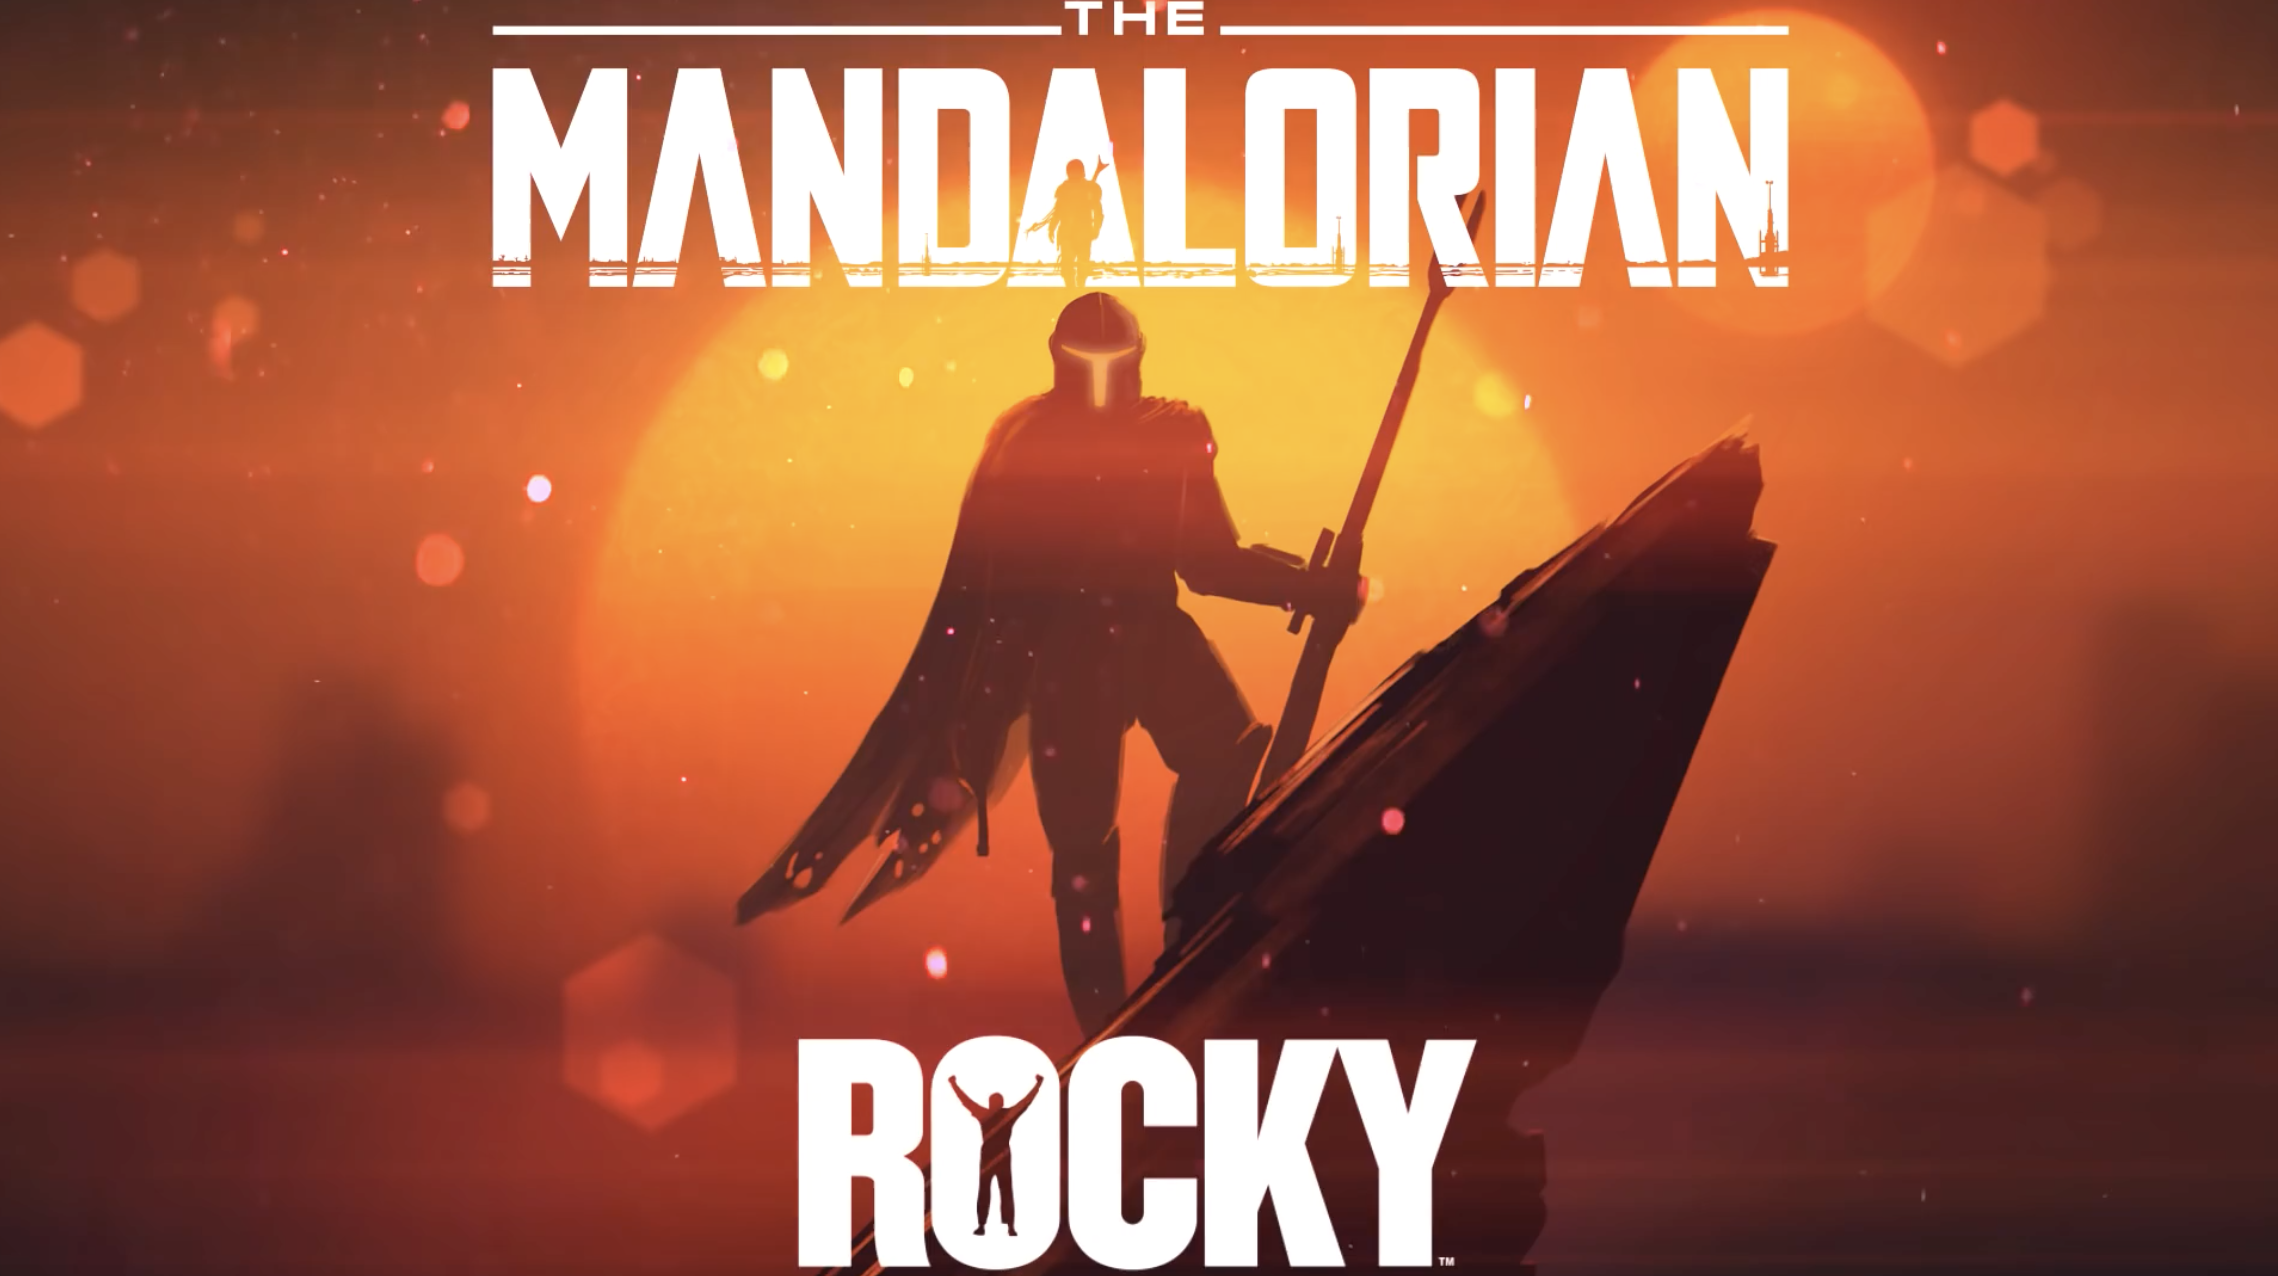 Someone Remixed The Mandalorian Theme With The Rocky Theme